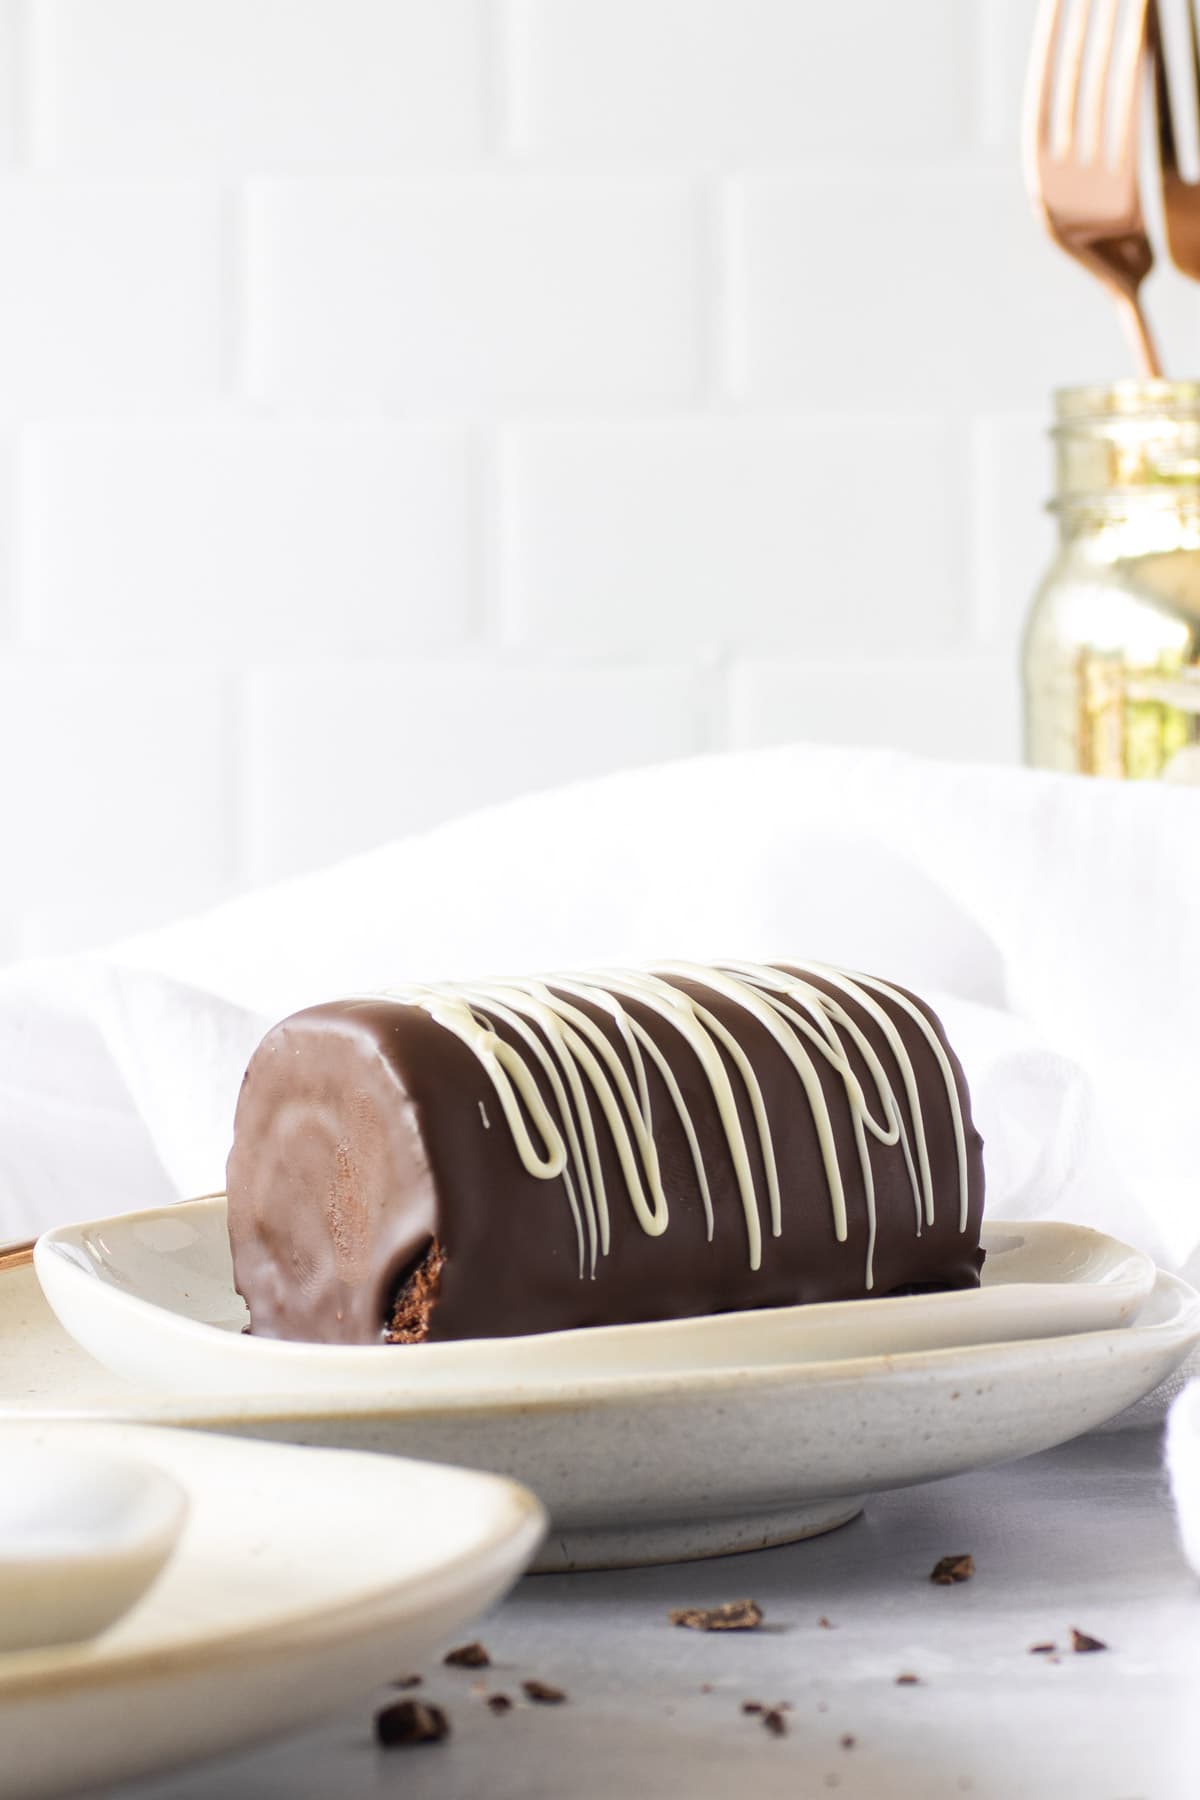 Chocolate coated swissl rolls on a white plate with a white napkin